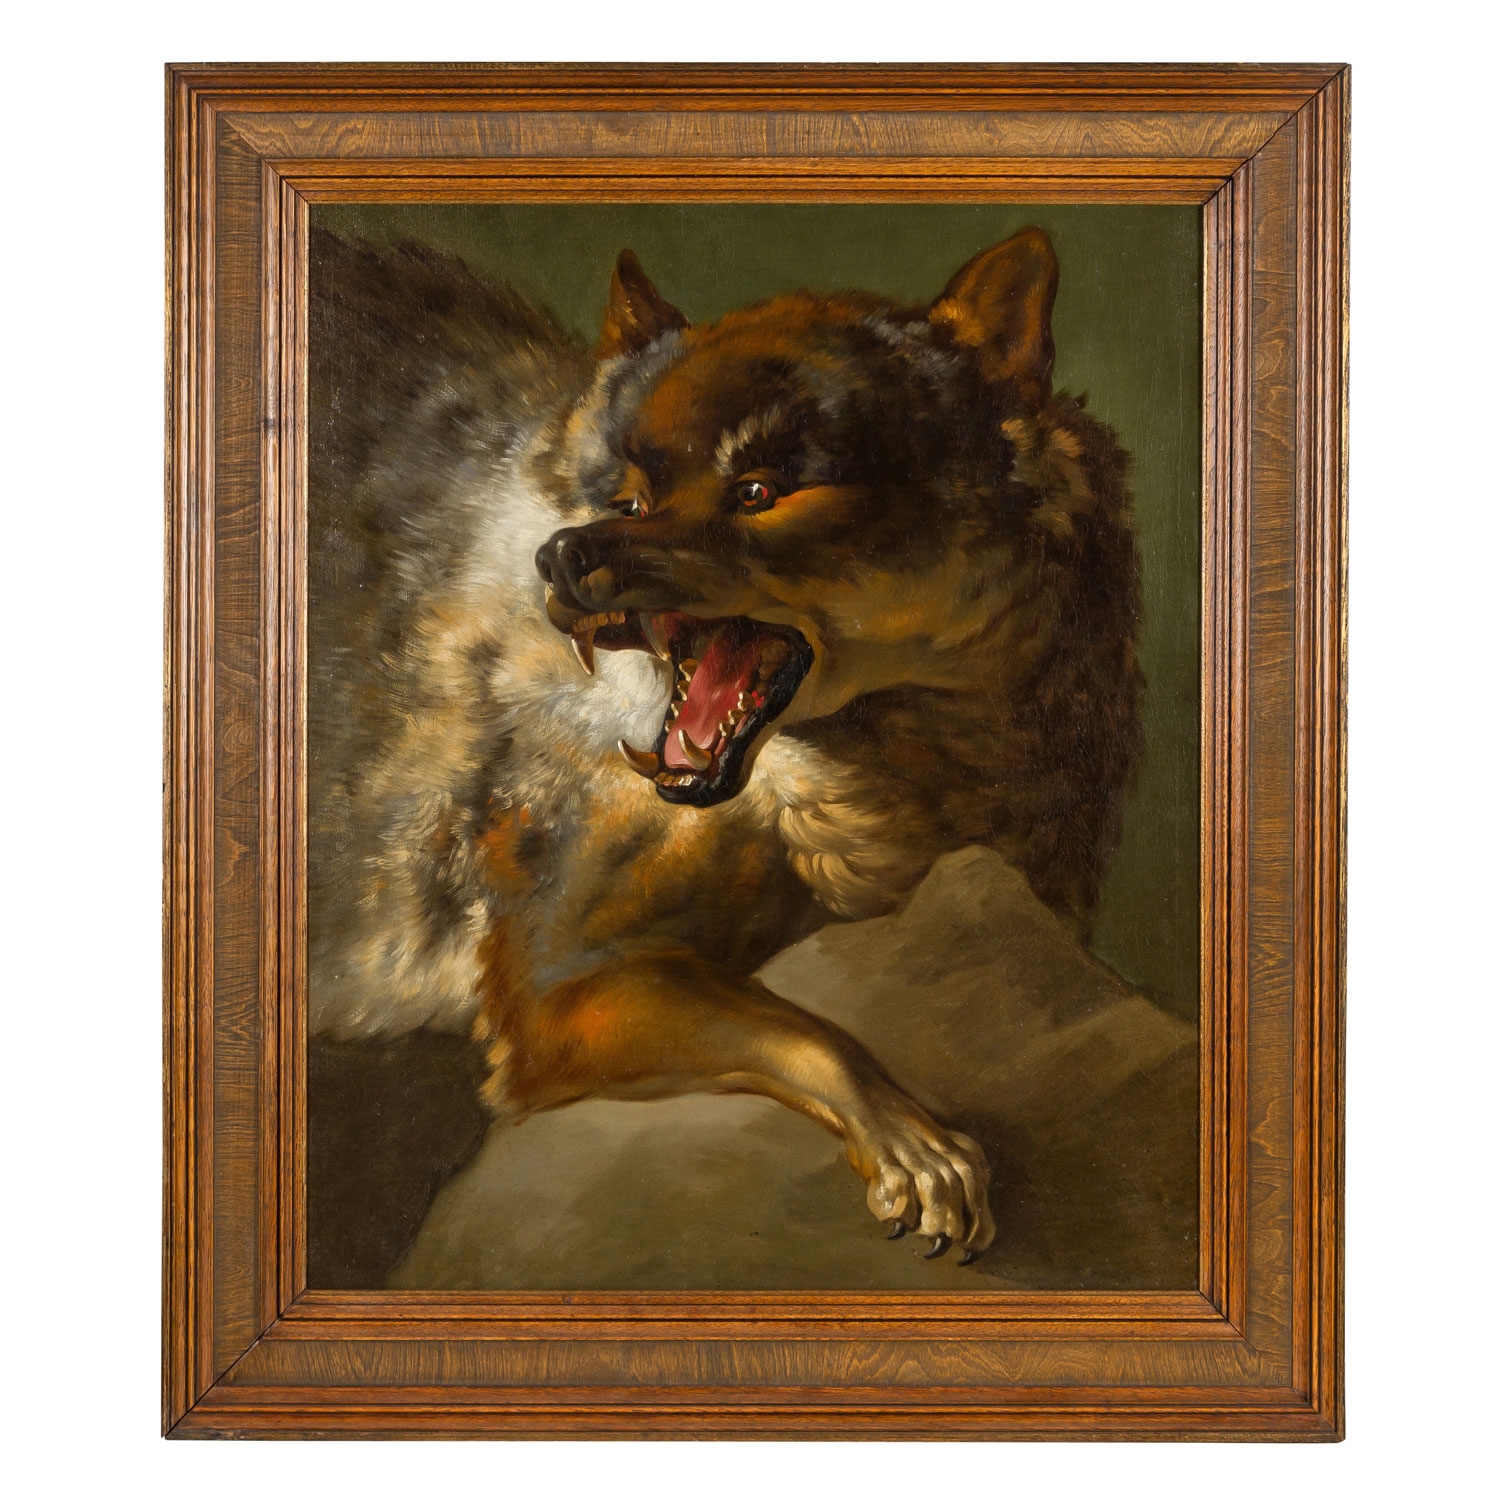 Artwork by Giuseppe Baldrighi, Wolf, Made of Oil on canvas